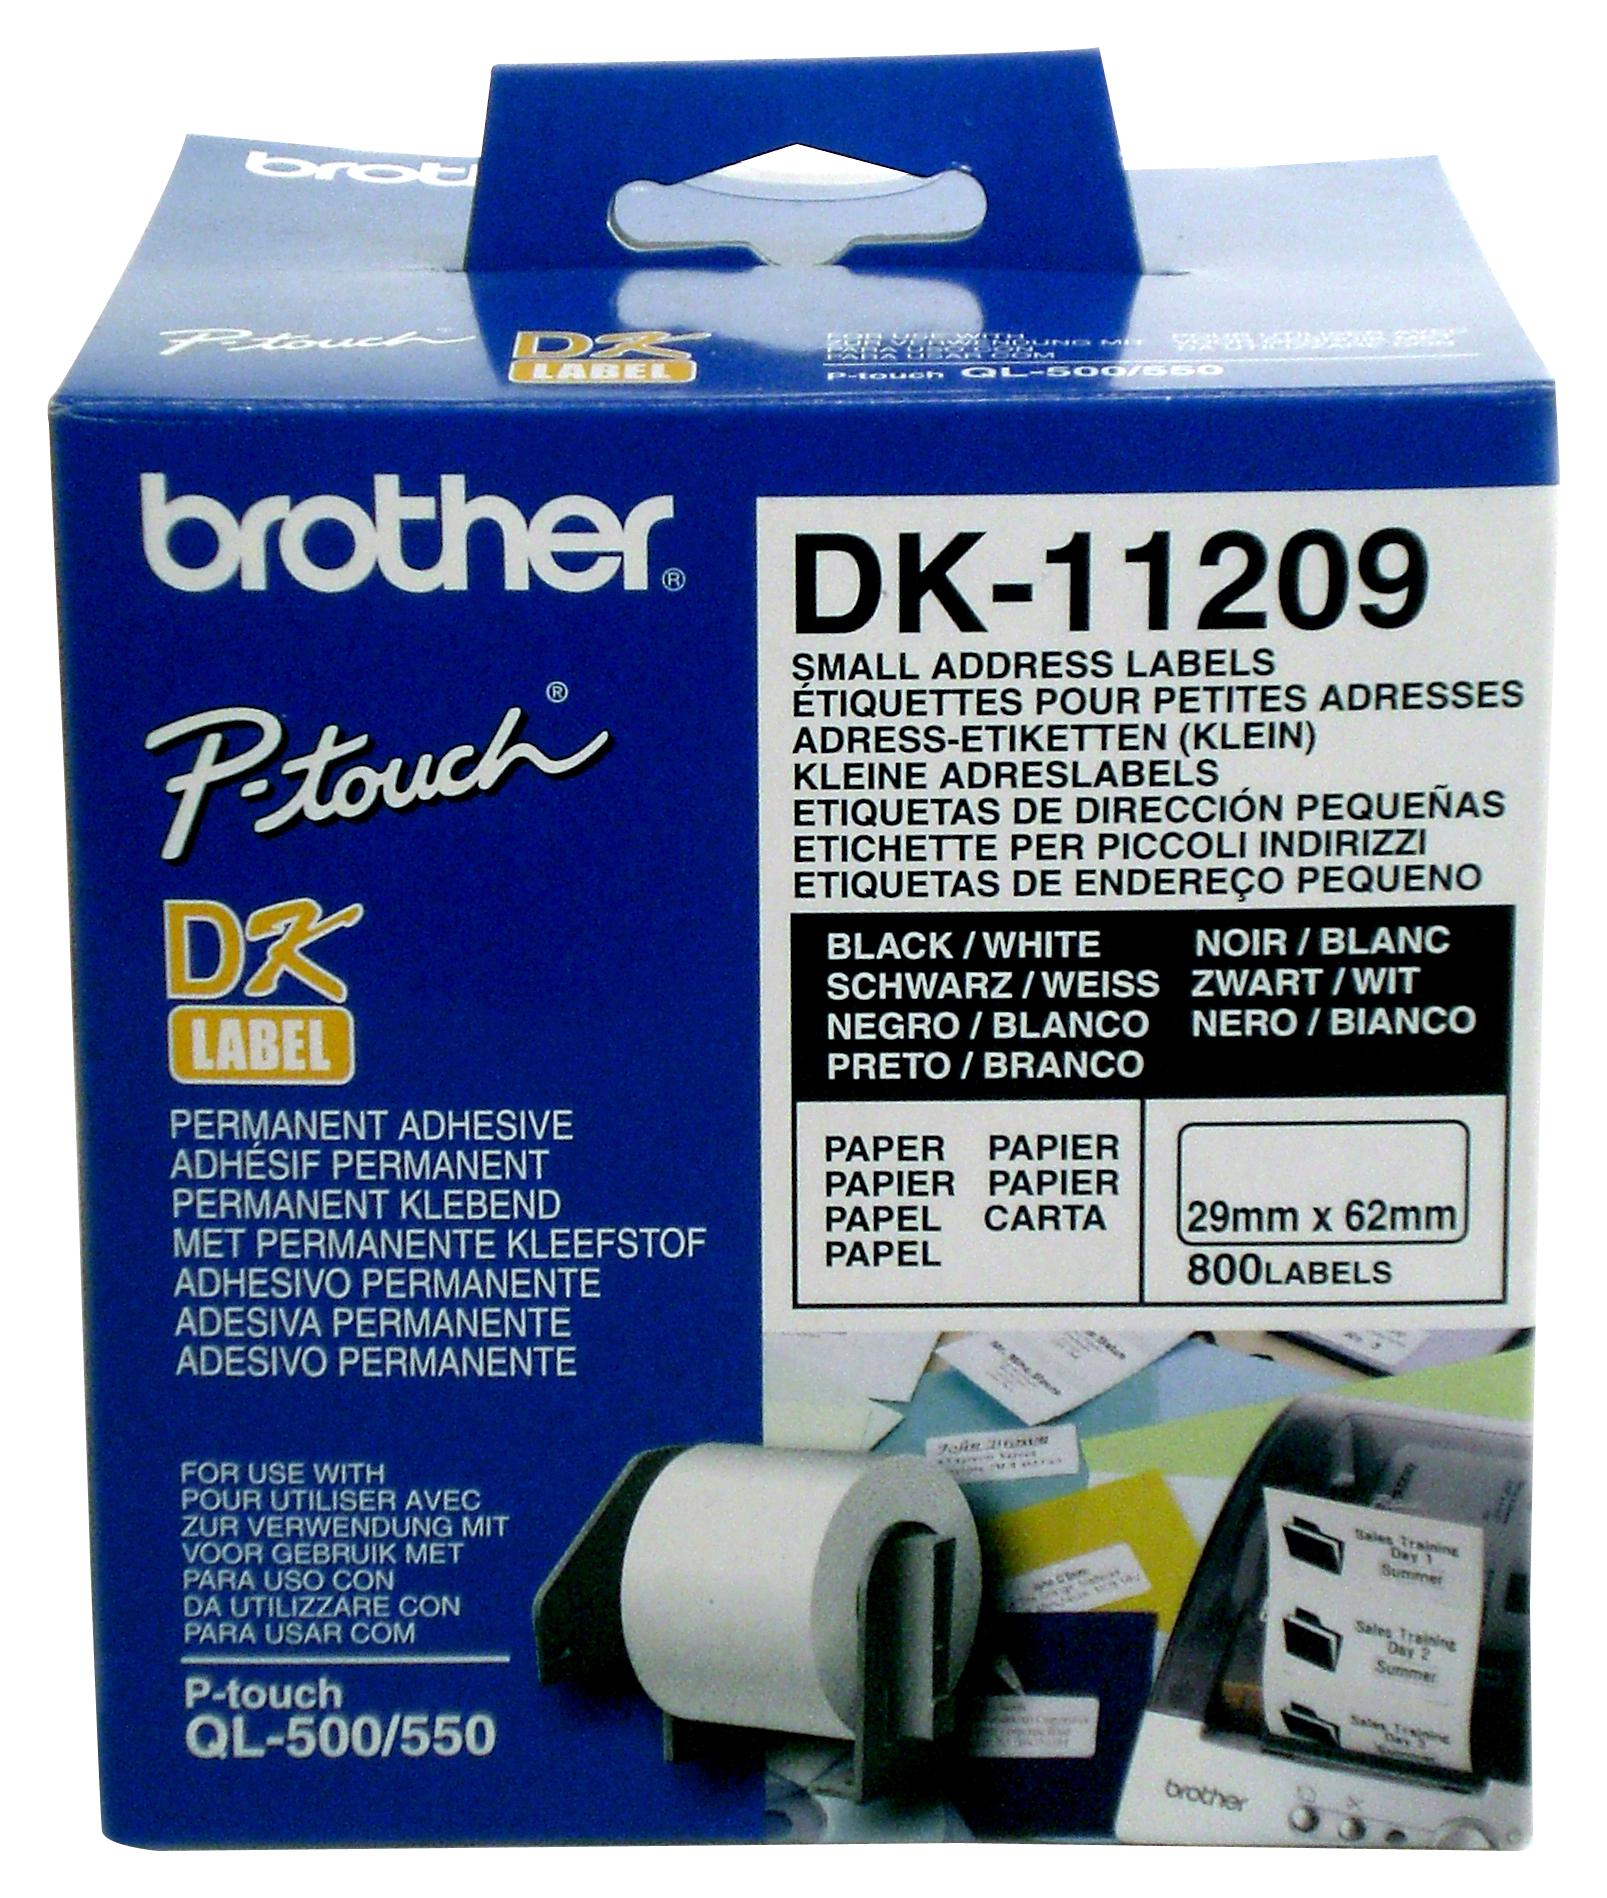 DK11209 LABEL, SMALL ADDRESS BROTHER